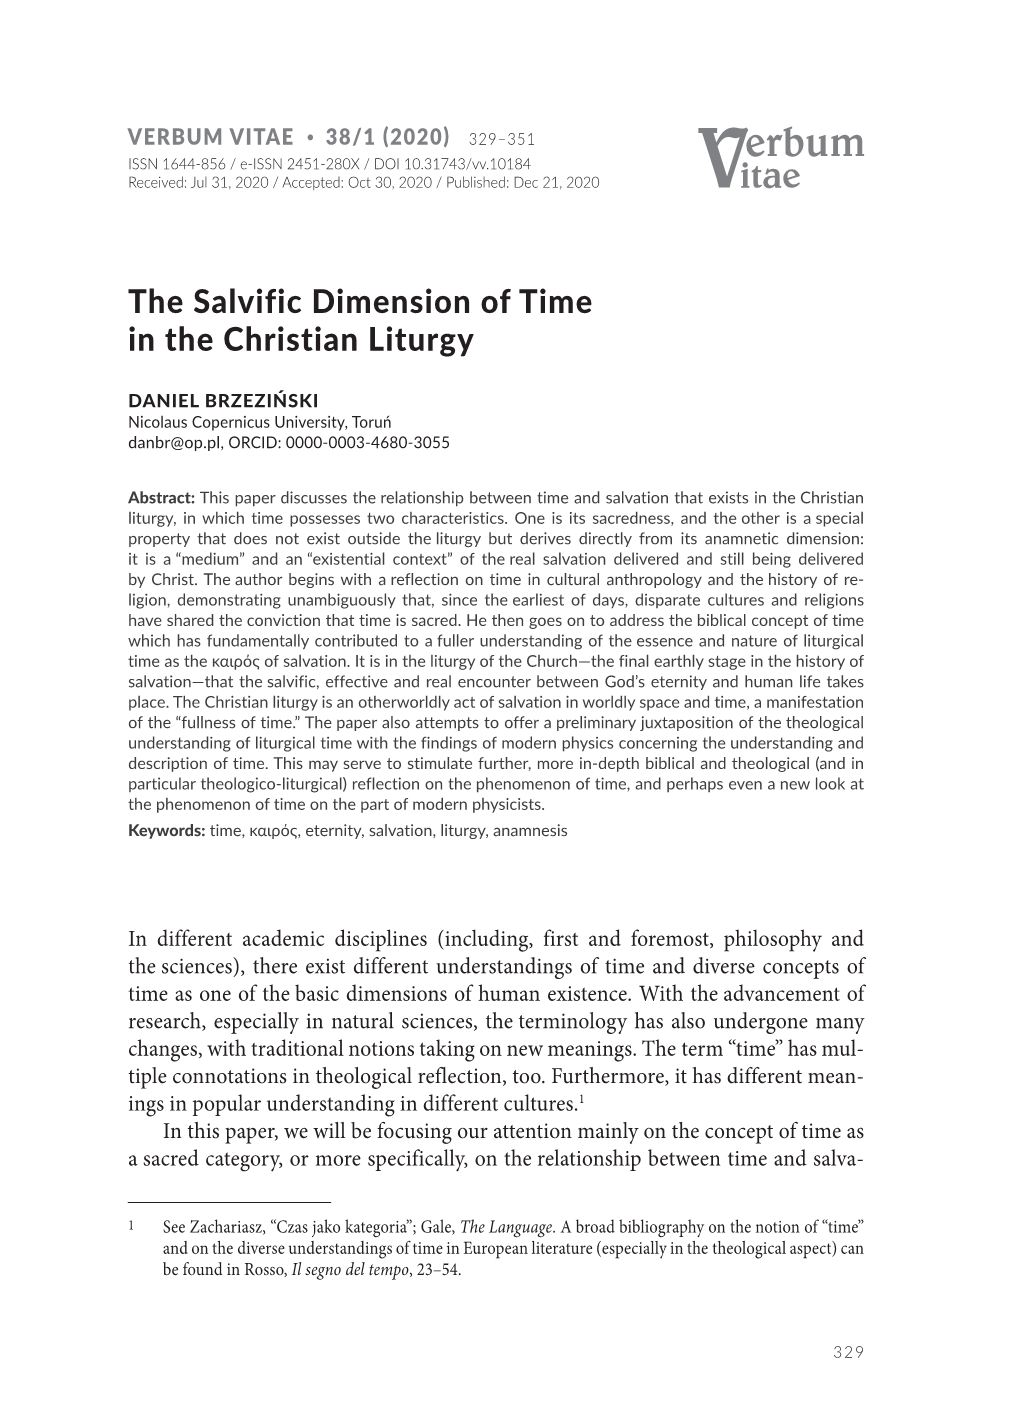 The Salvific Dimension of Time in the Christian Liturgy